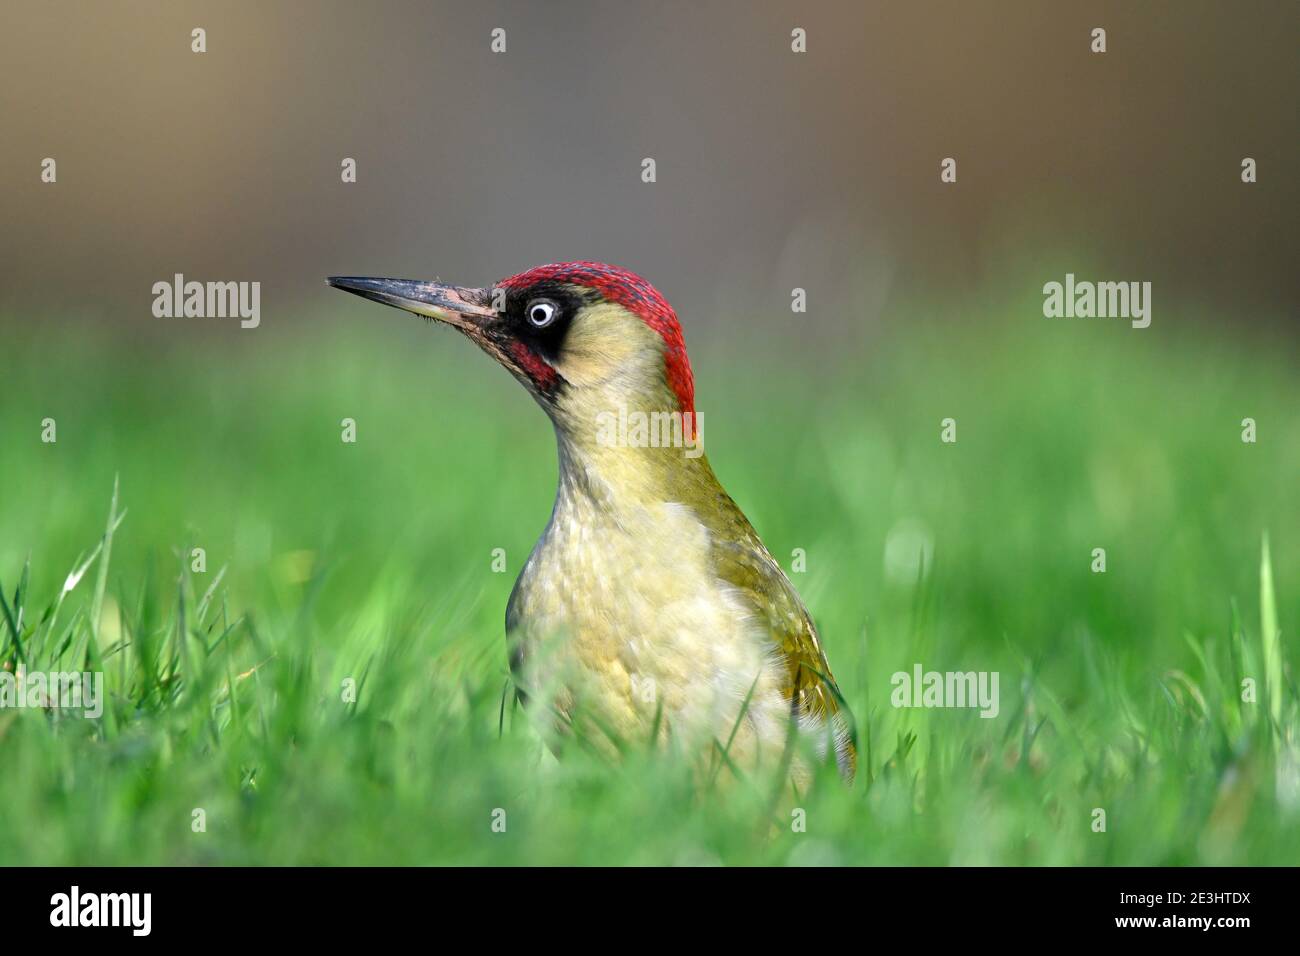 Green Woodpecker (Picus viridis) male sitting on grassy ground, Wales, December Stock Photo